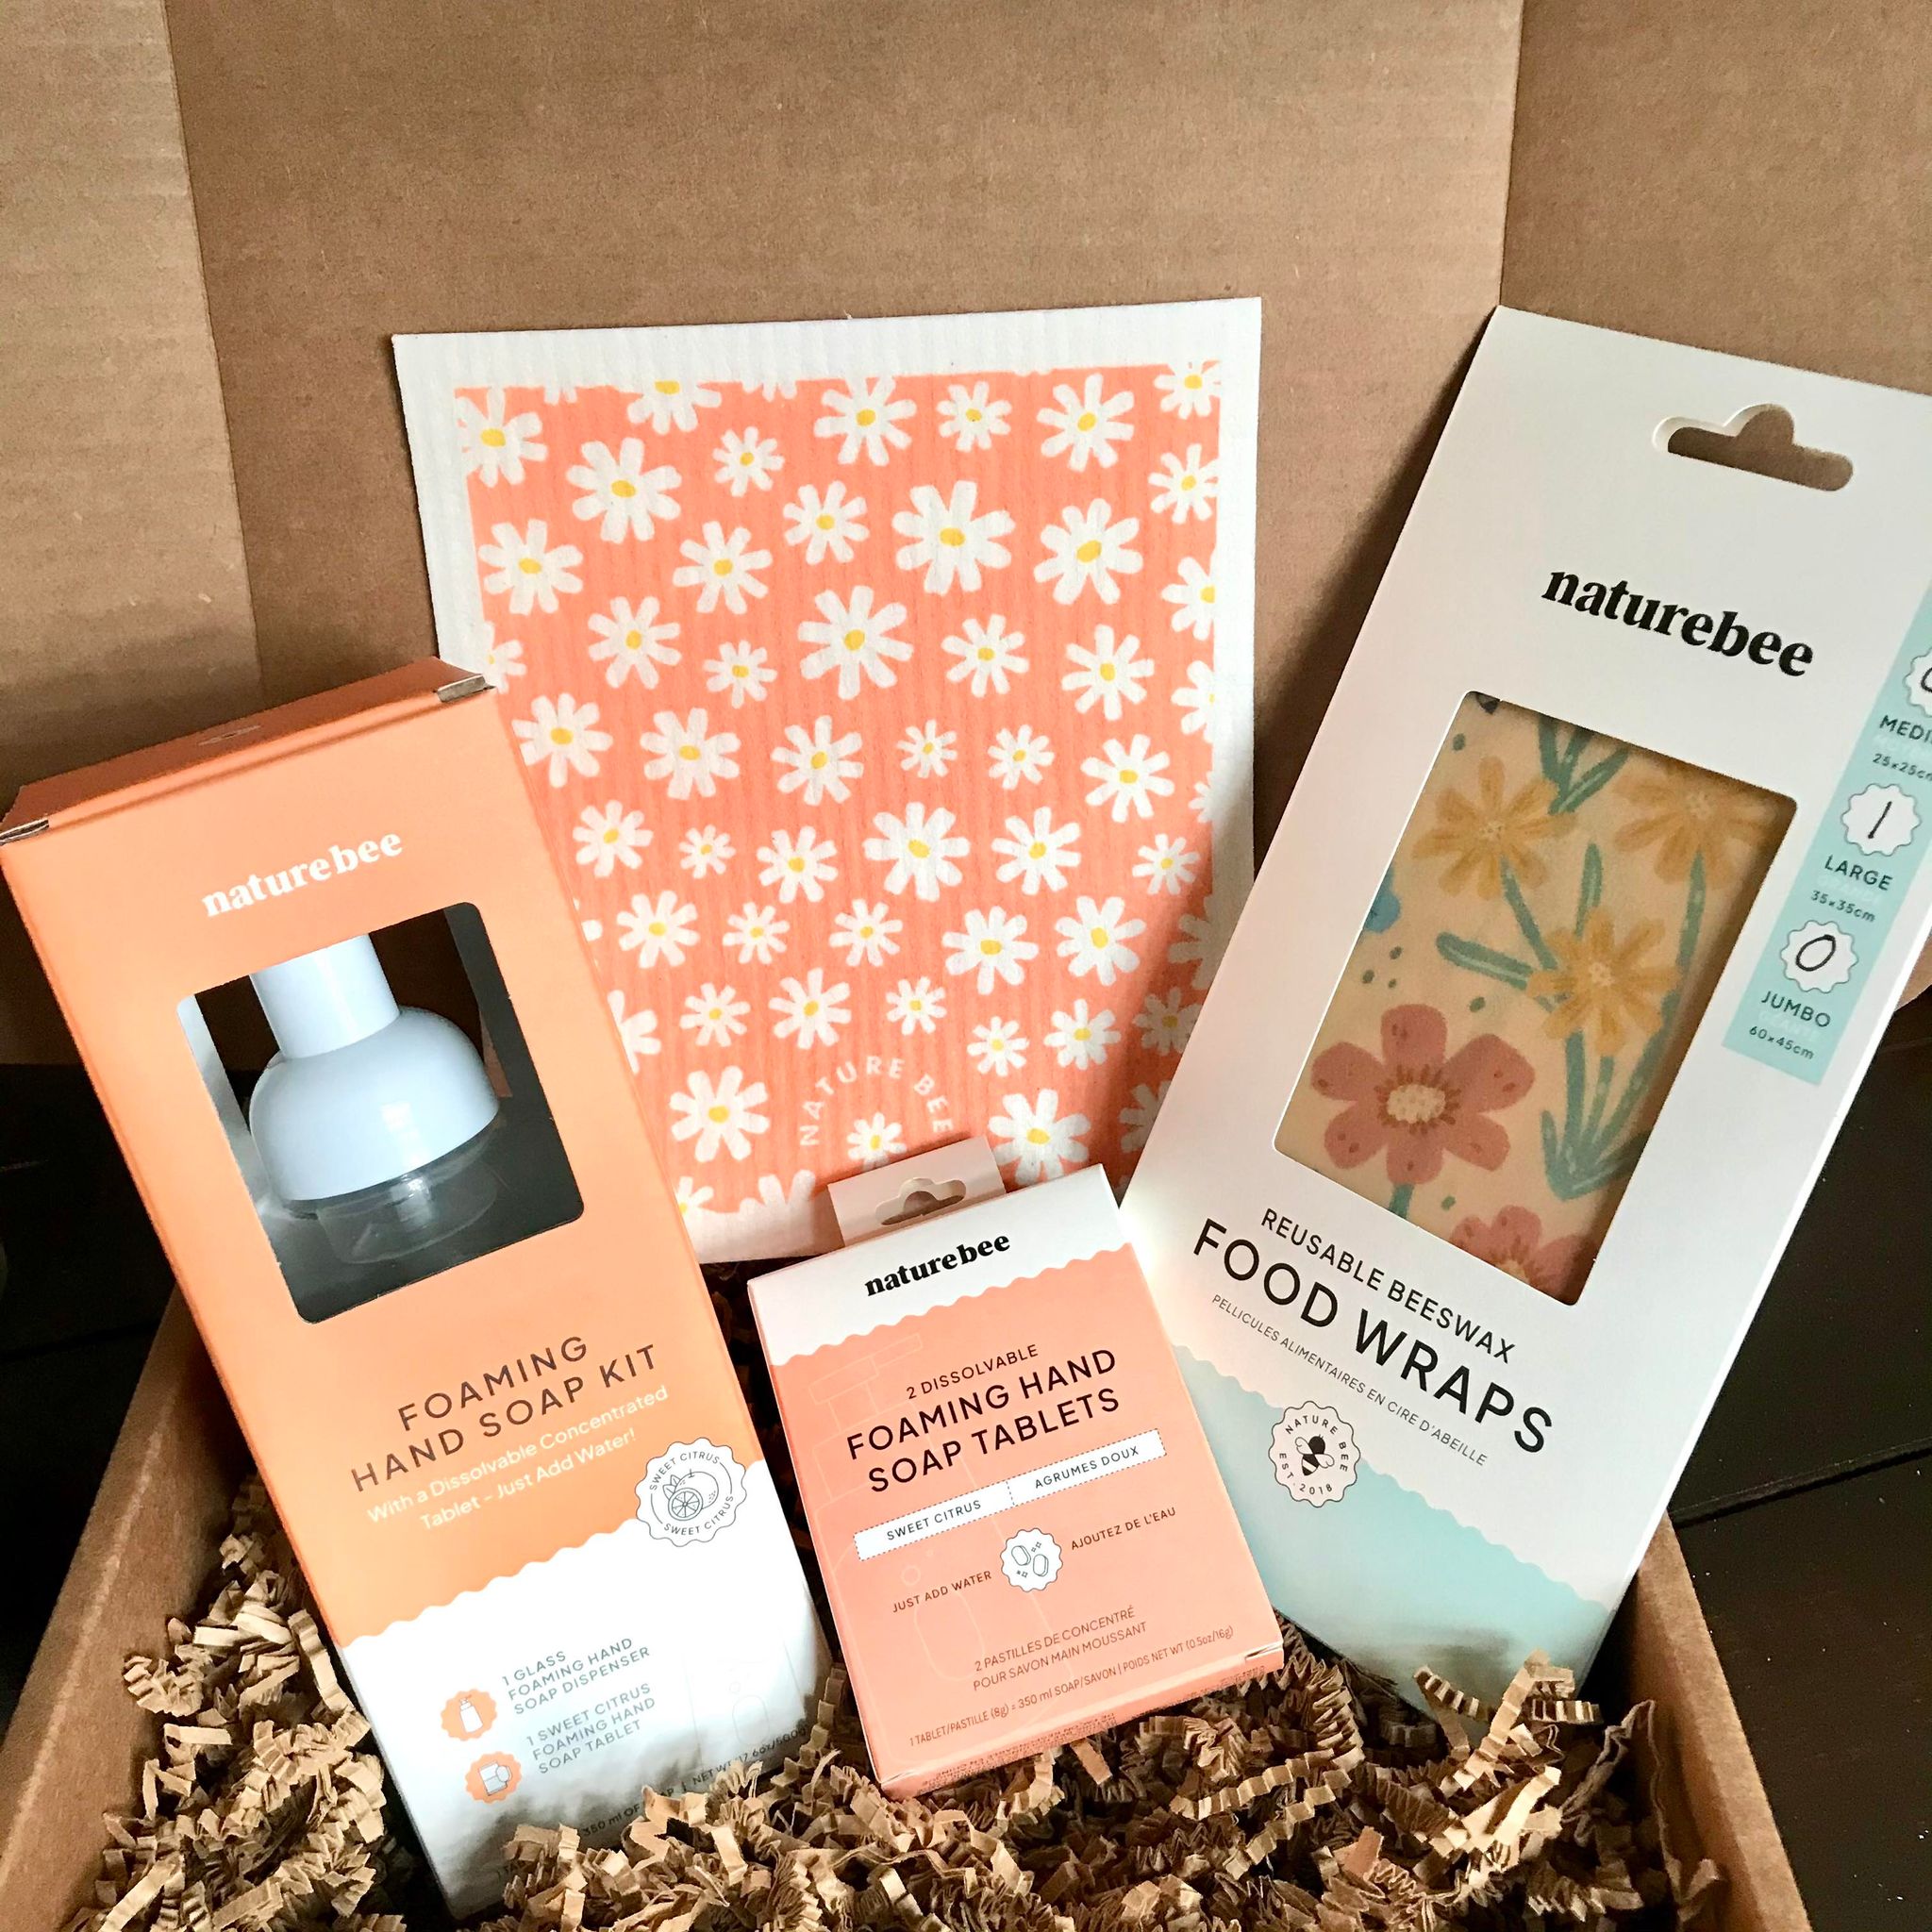 Included in this zero waste kitchen set is Swedish sponge cloth in a daisy pattern, a sweet citrus foaming hand soap kit, a set of two sweet citrus foaming hand soap tablets and a large green 'wildflower' beeswax wrap.